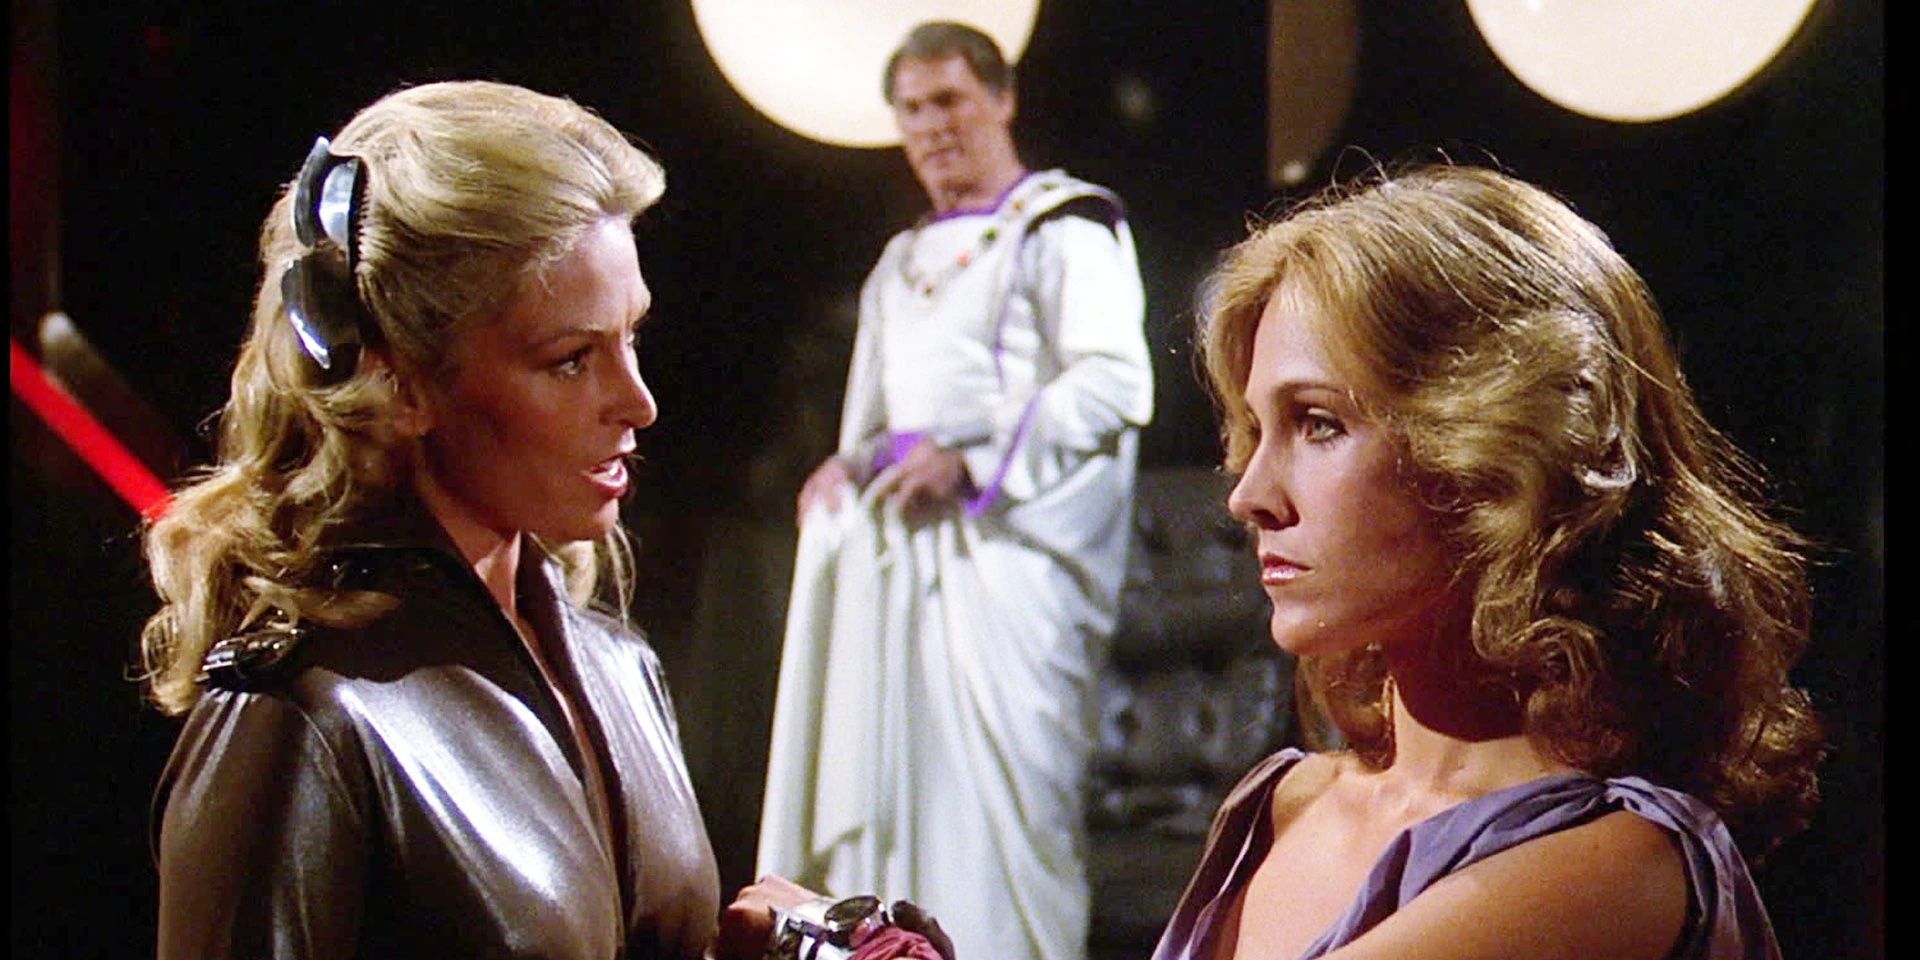 Planet of the Slave Girls episode of Buck Rogers.